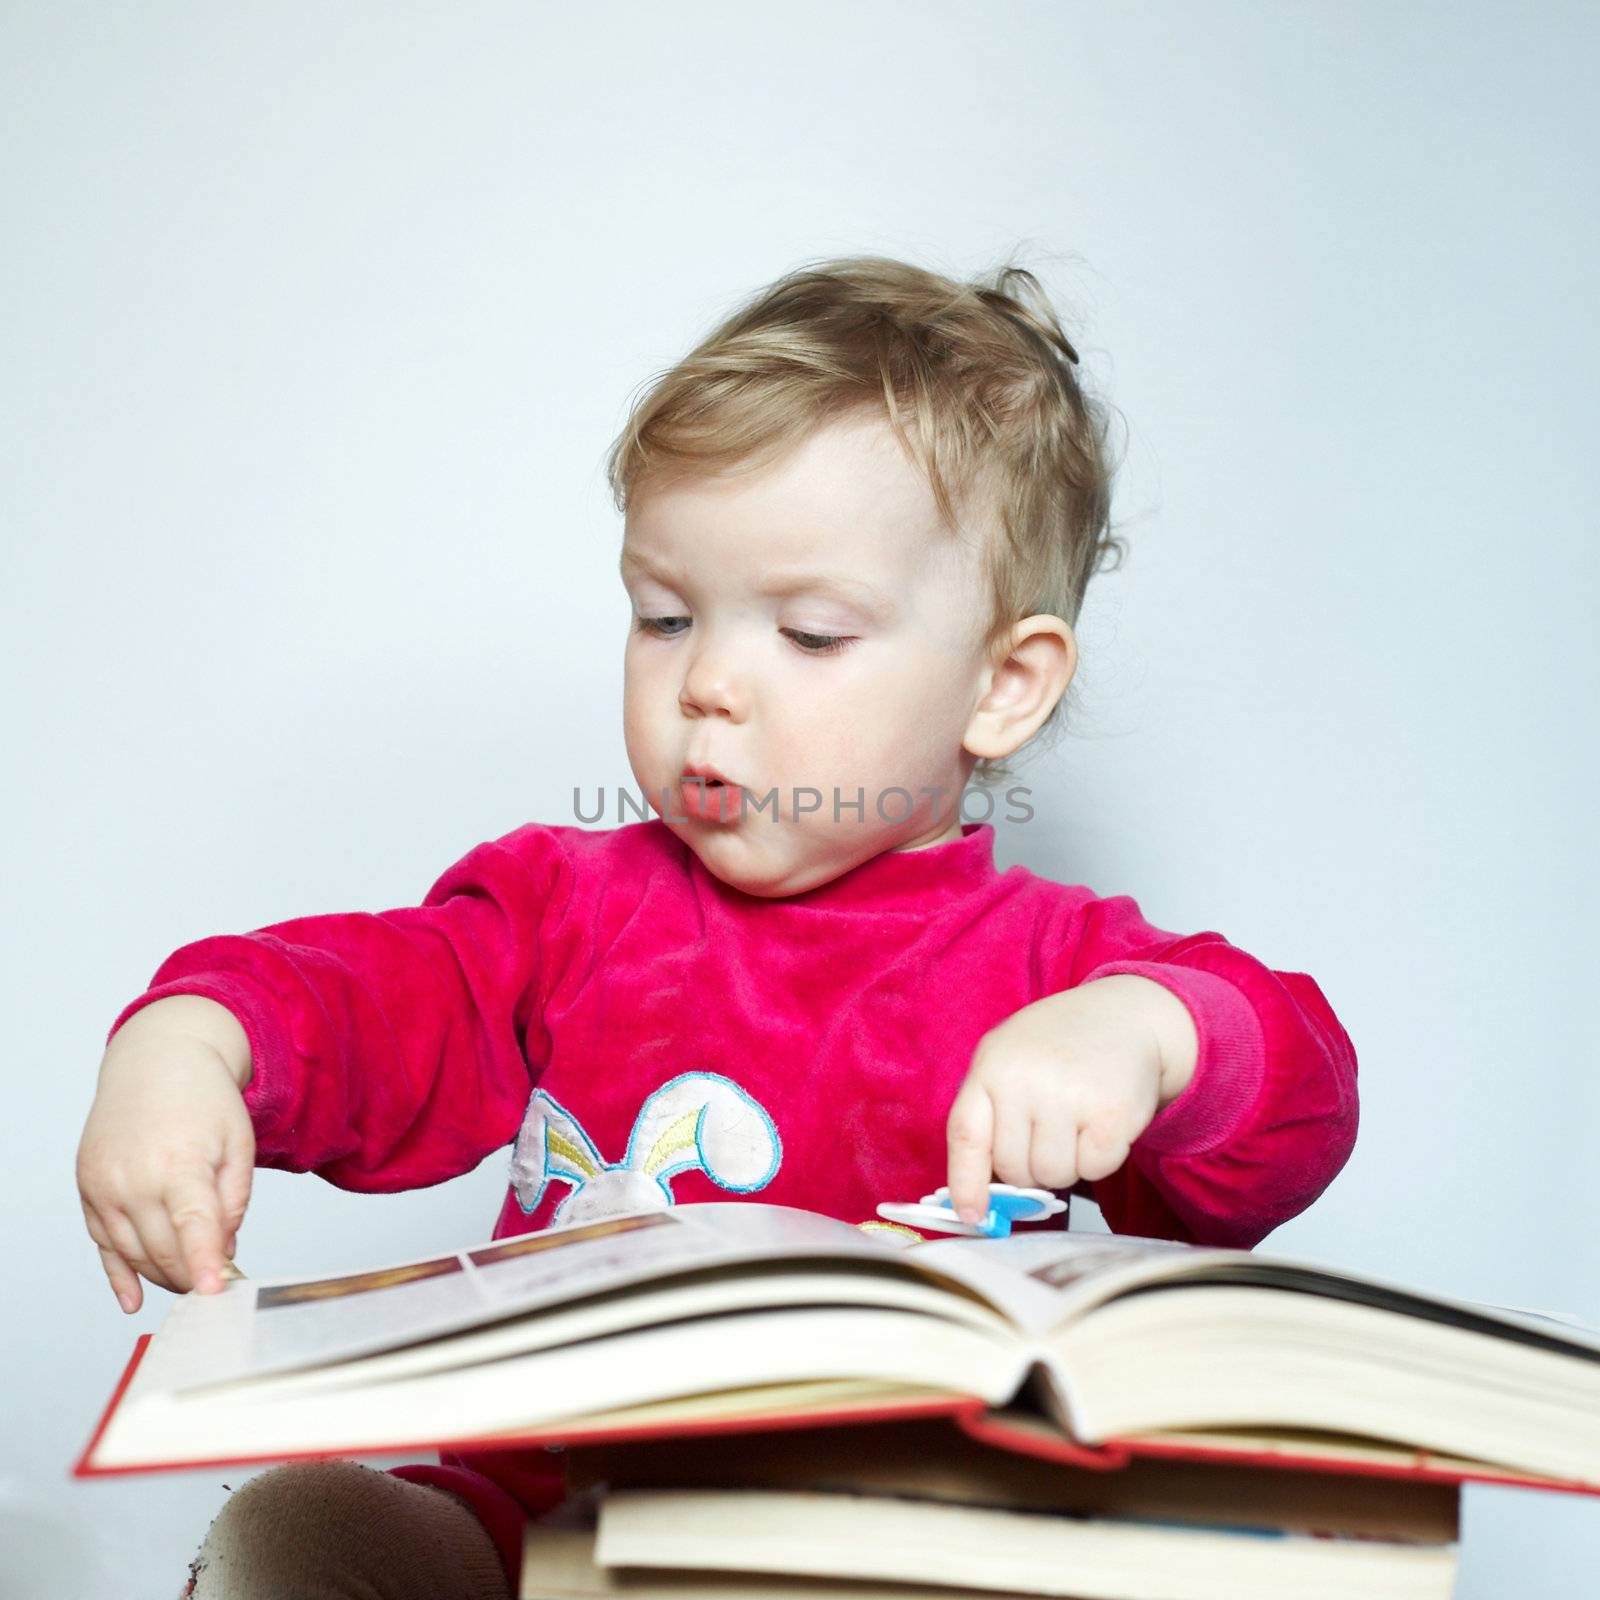 An image of child reading book